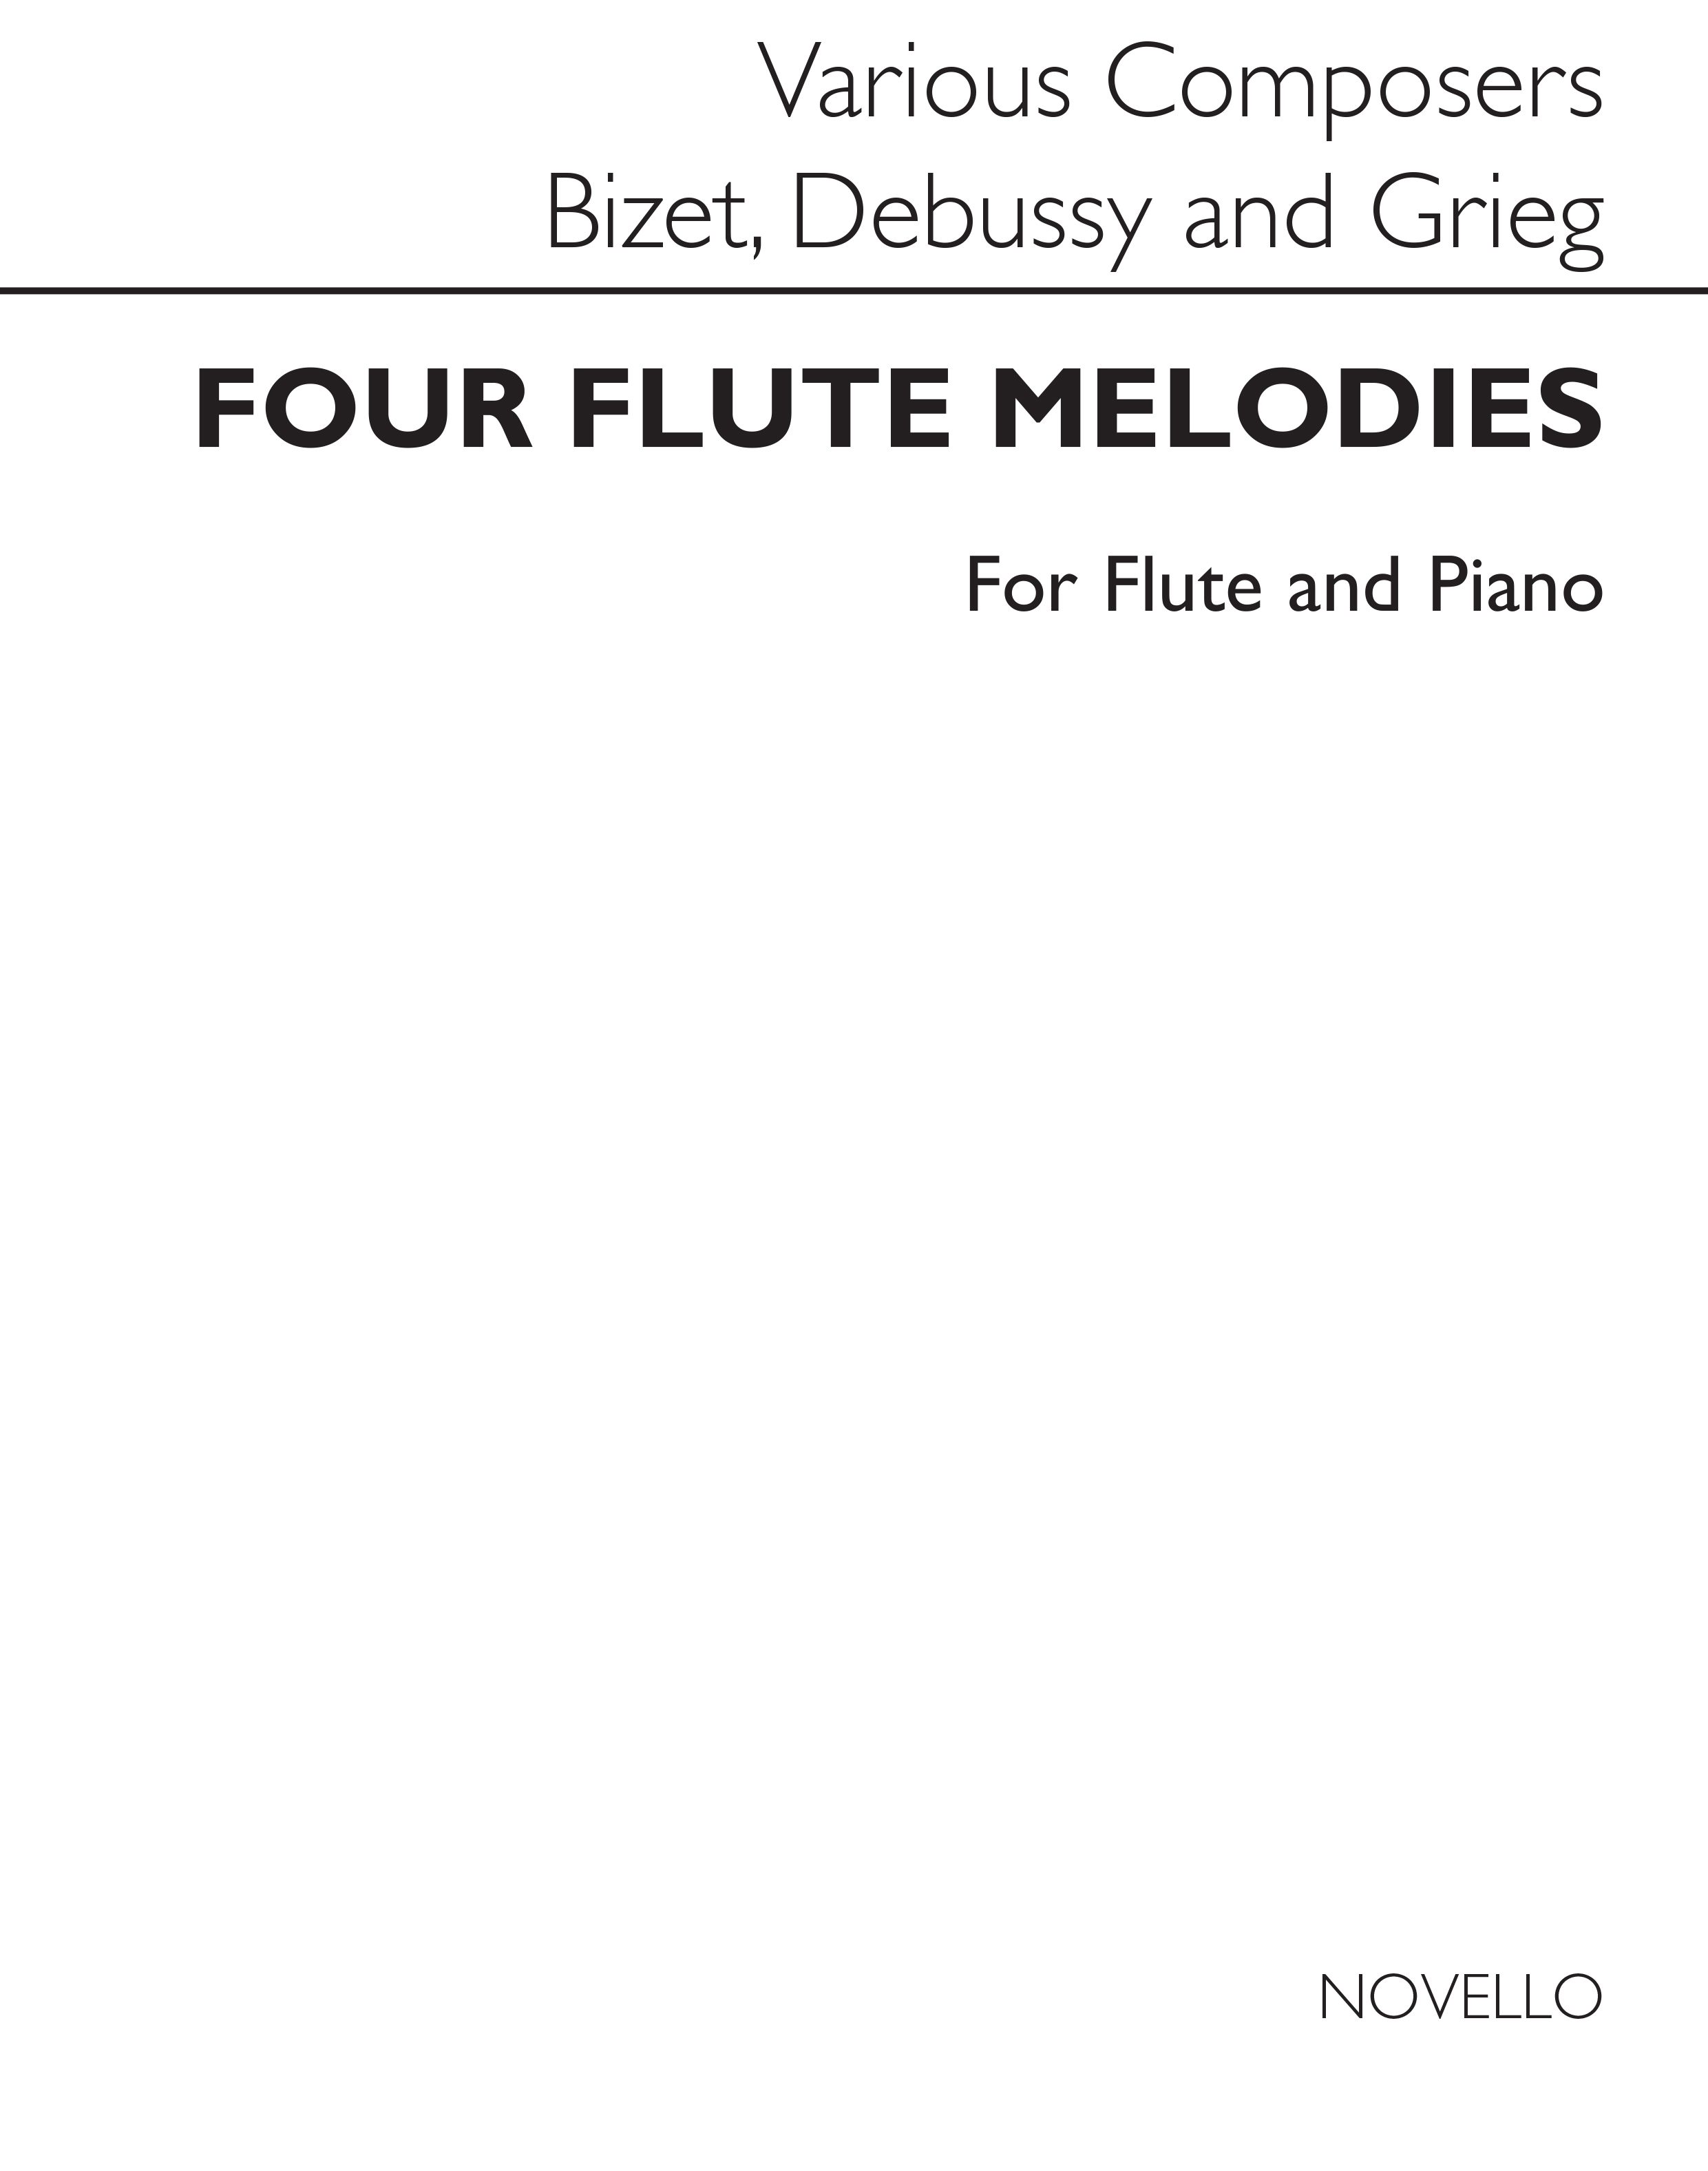 Starkey: Four Flute Melodies for Flute and Piano